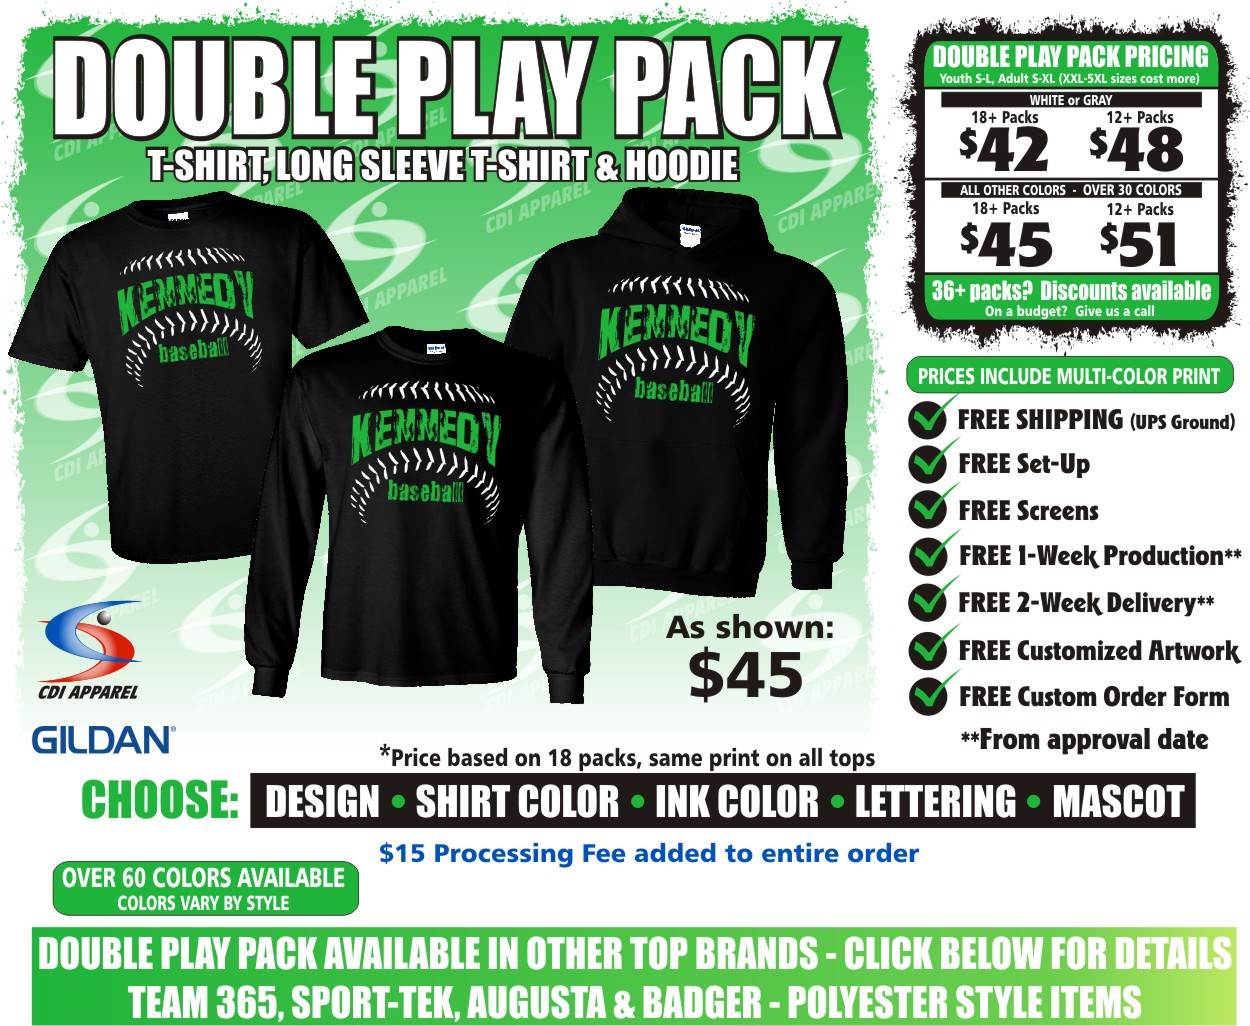 Double PlayPack Baseball 2017 Pricing